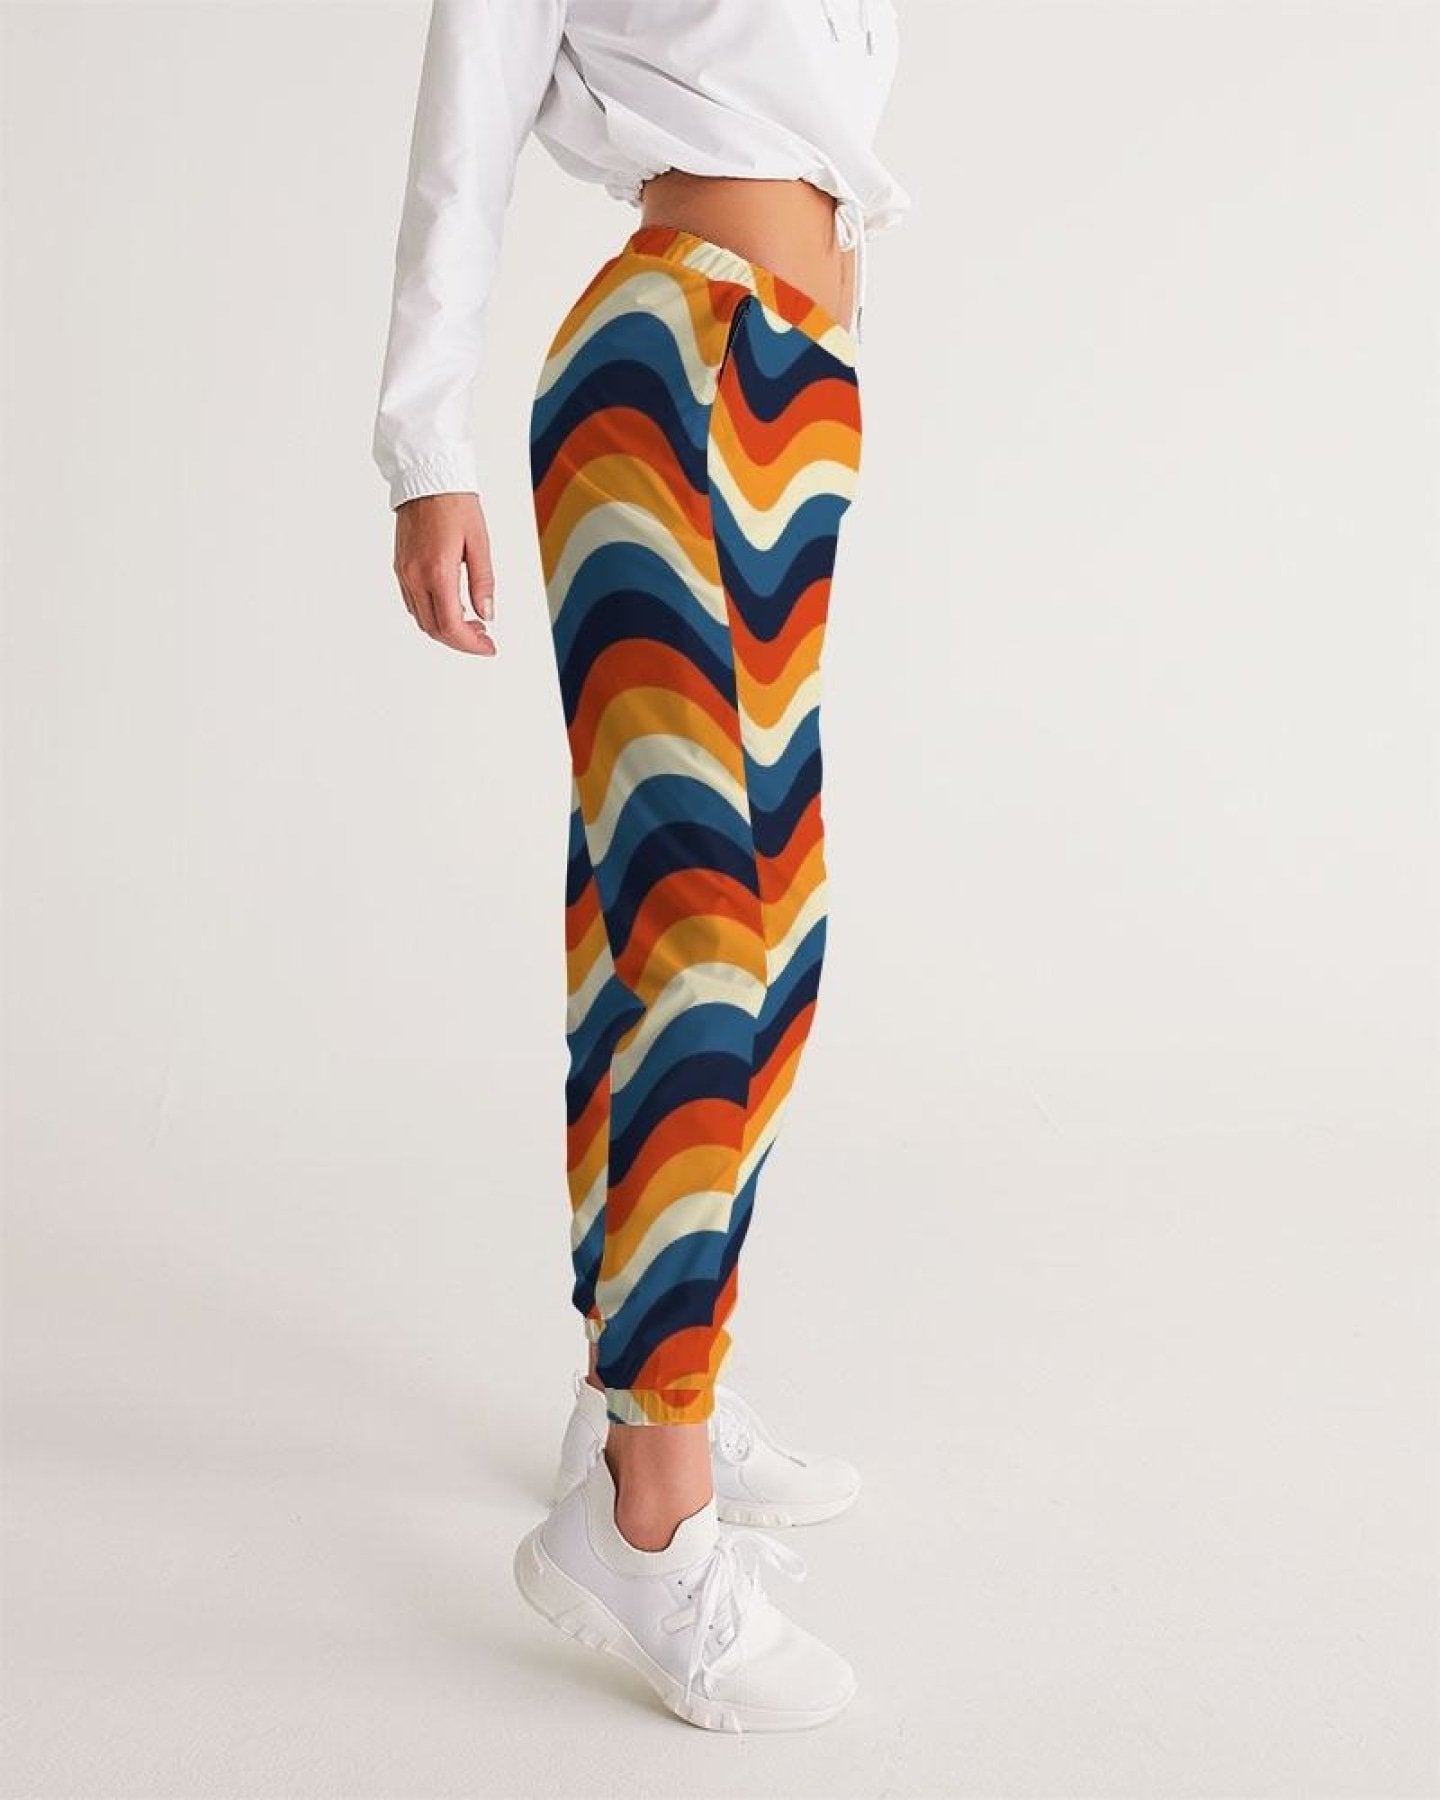 Elevate your style with comfy geometric track pants. Stand out in unique designs while staying active. Shop now for a fashionable workout!